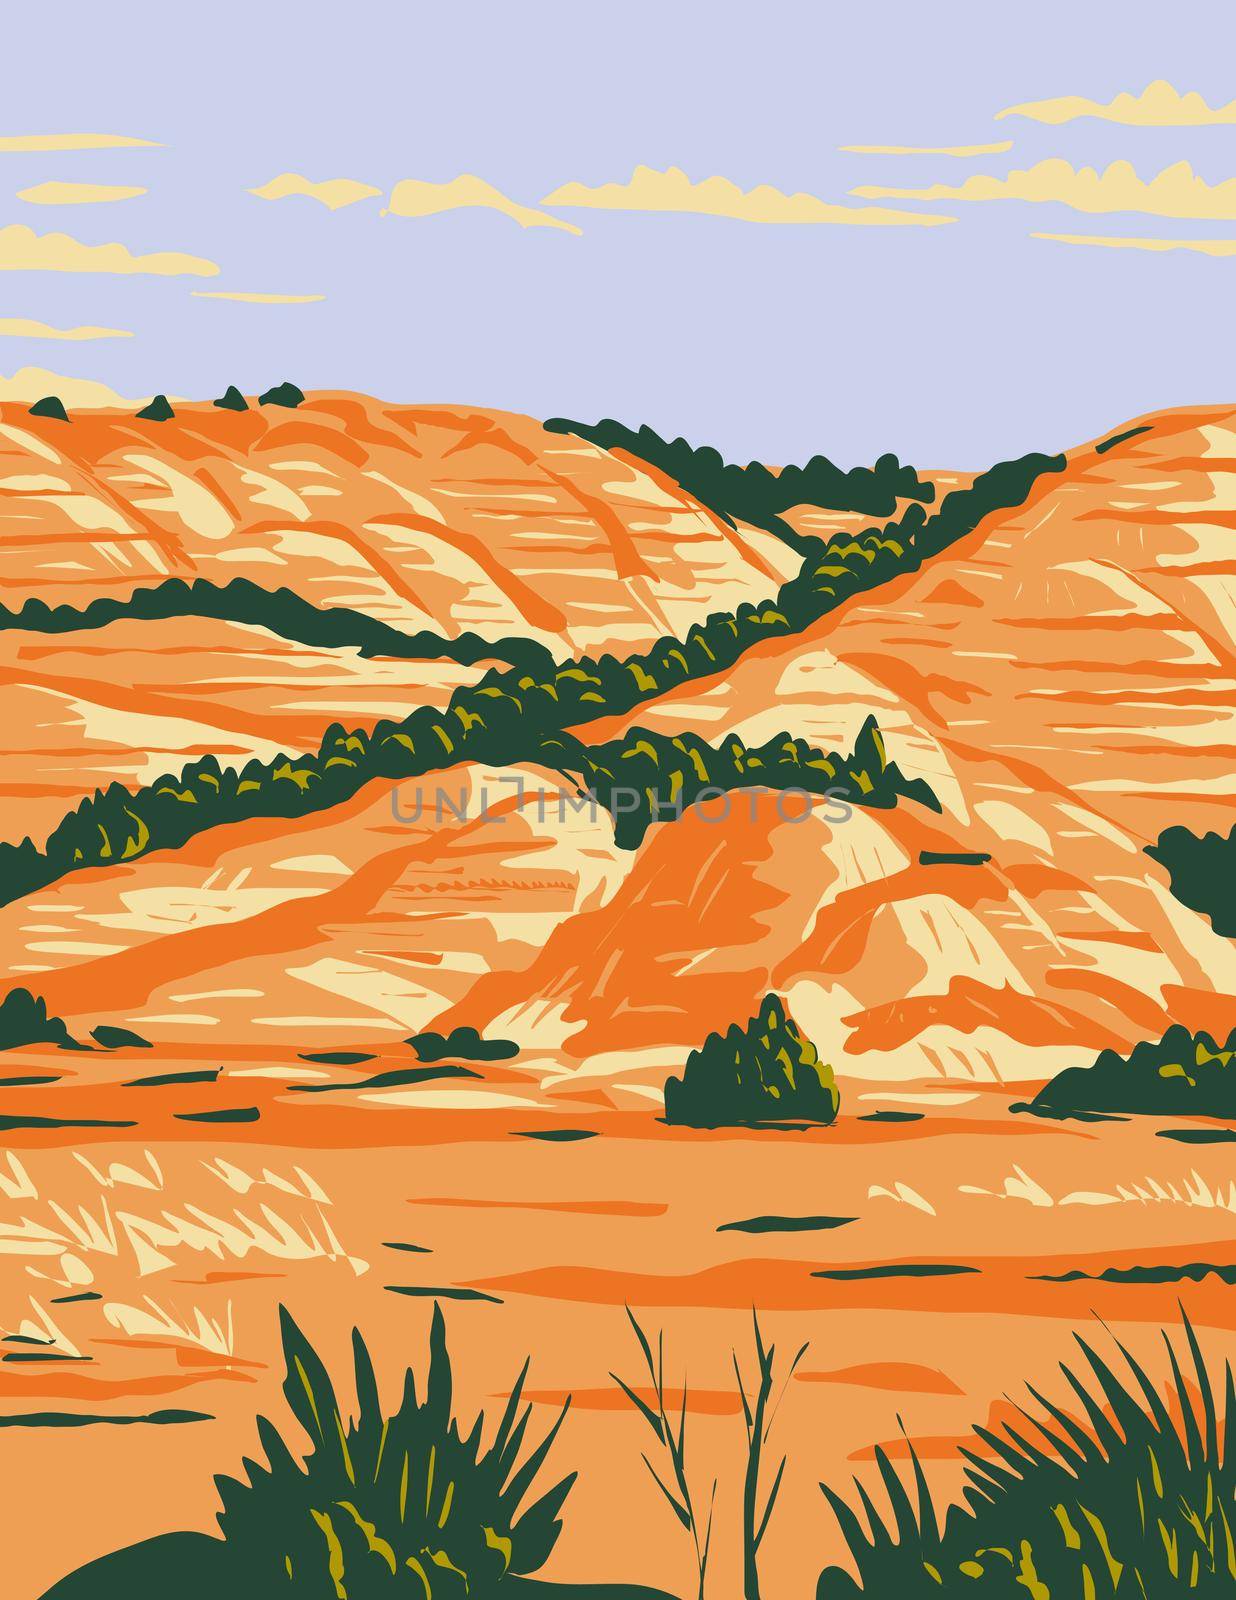 WPA Poster Art of North Dakota Badlands in Theodore Roosevelt National Park located in Medora, North Dakota done in works project administration style or federal art project style.